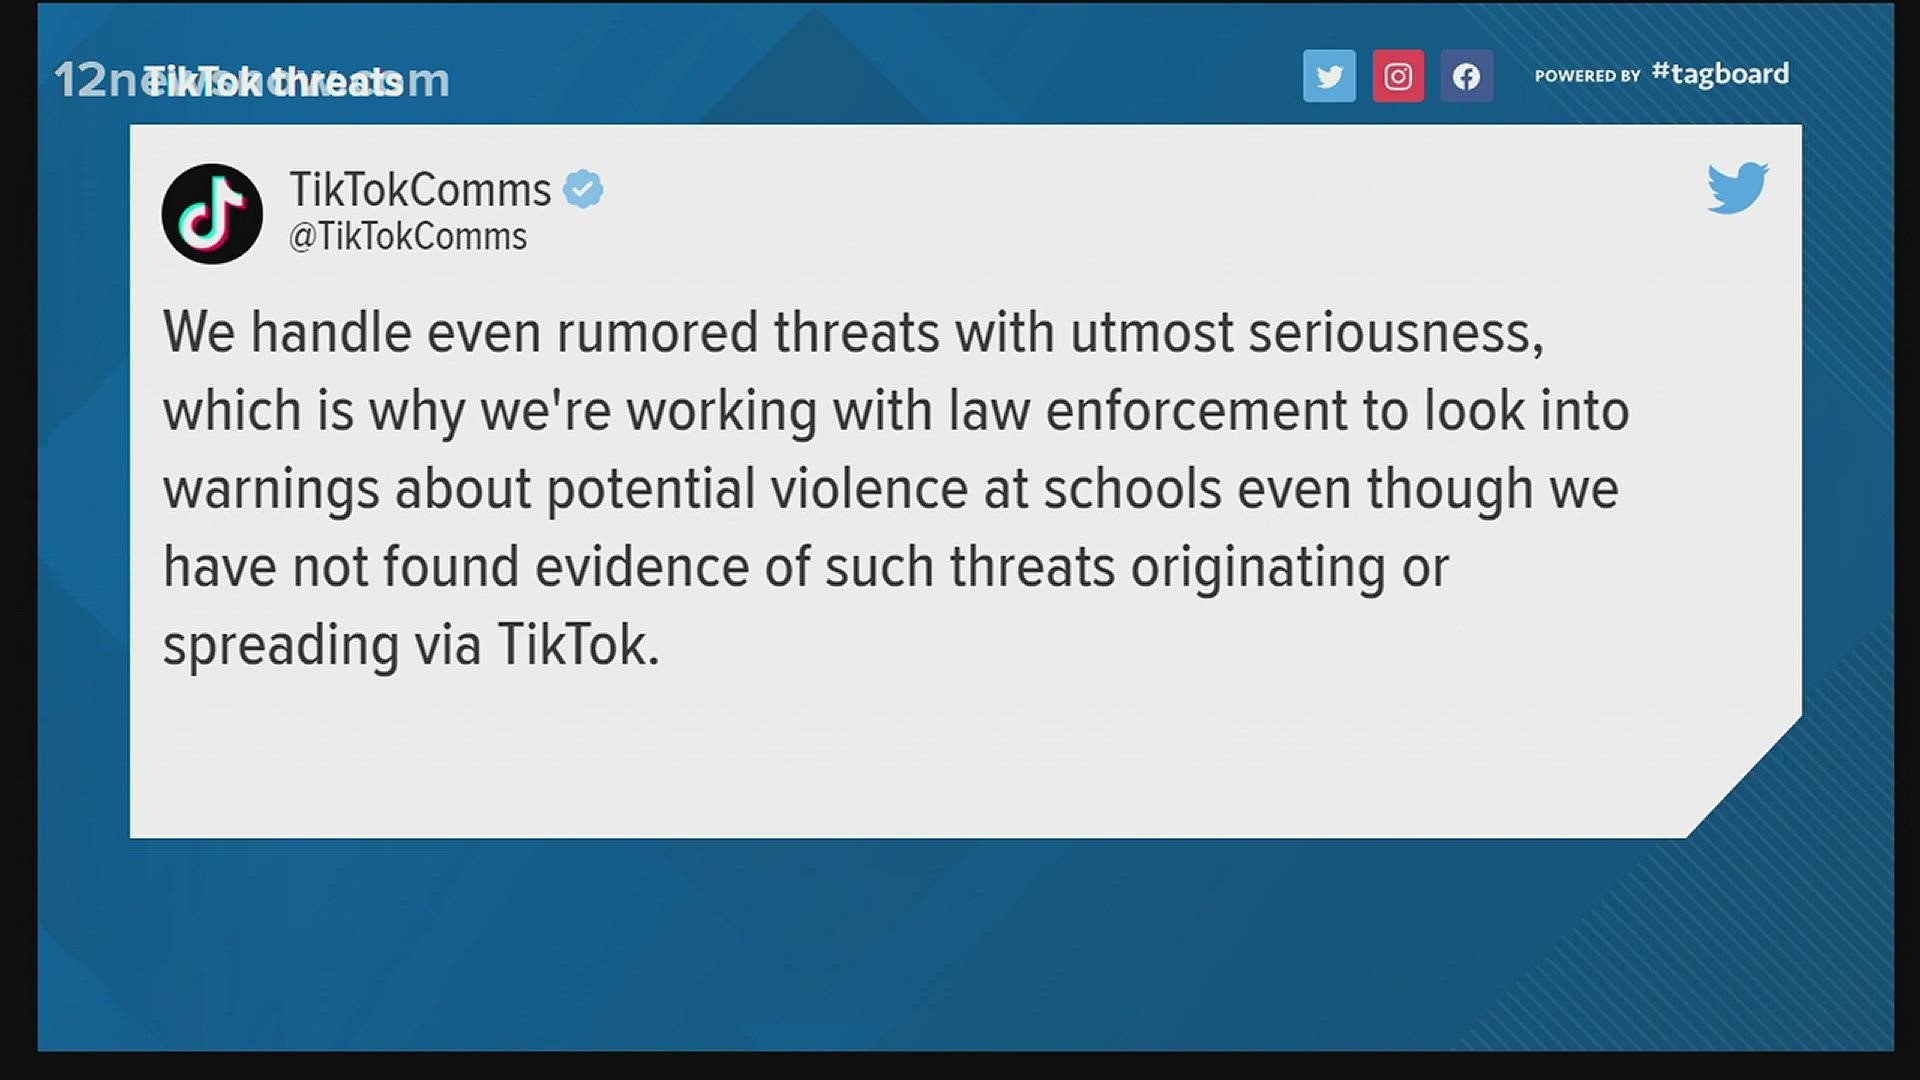 The threats had schools on edge as they circulated in the aftermath of the deadly Michigan school shooting, which has been followed by numerous copycat threats.